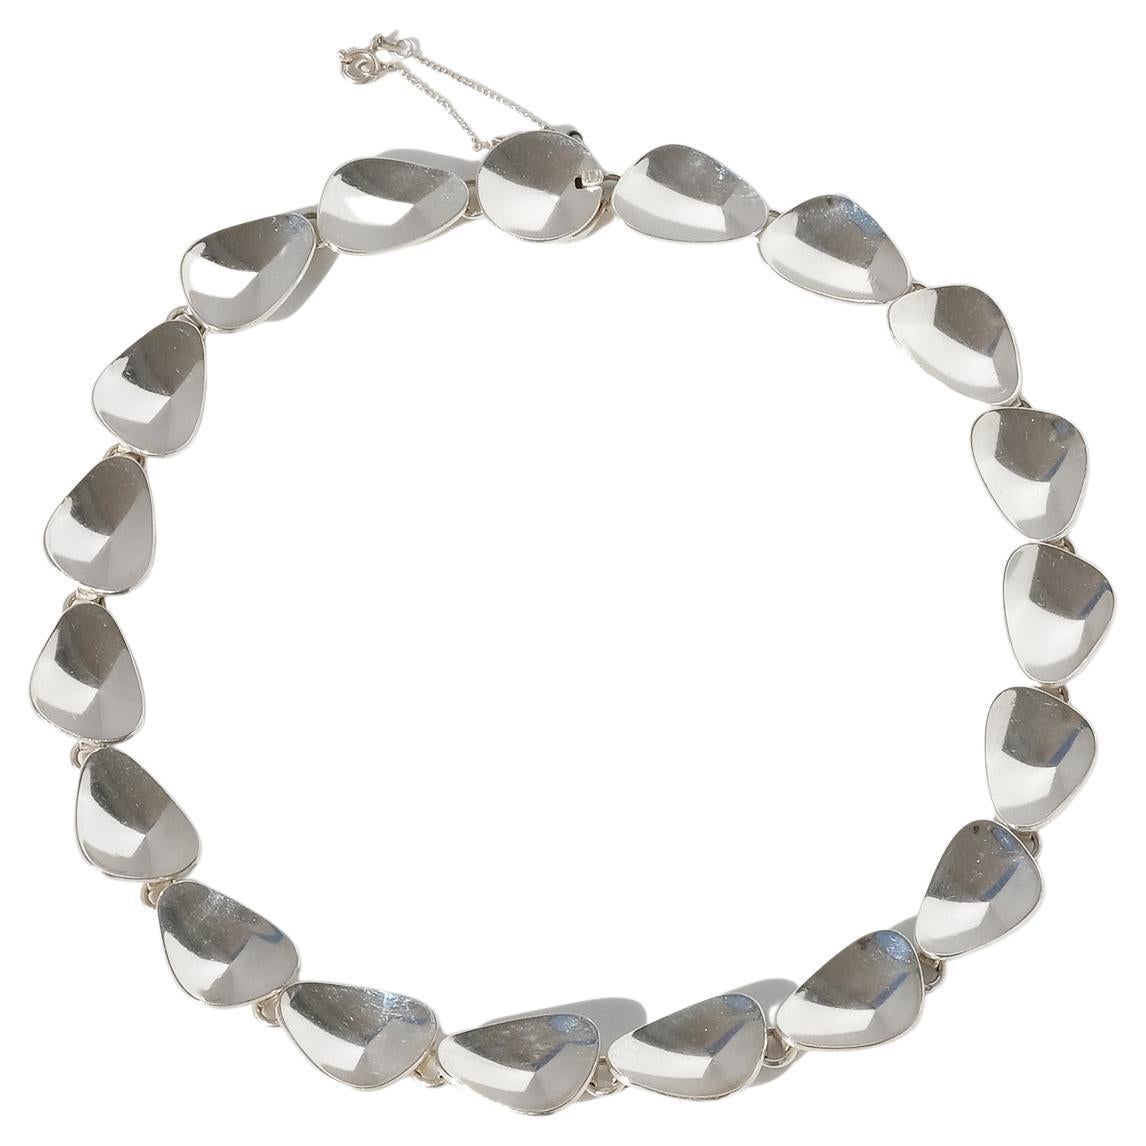 This silver necklace has a glossy surface. The small silver plates are shaped as perfect silver shells and they are connected together with silver rings. The necklace closes easily with a box clasp and it has also a safety chain.

This is a piece of